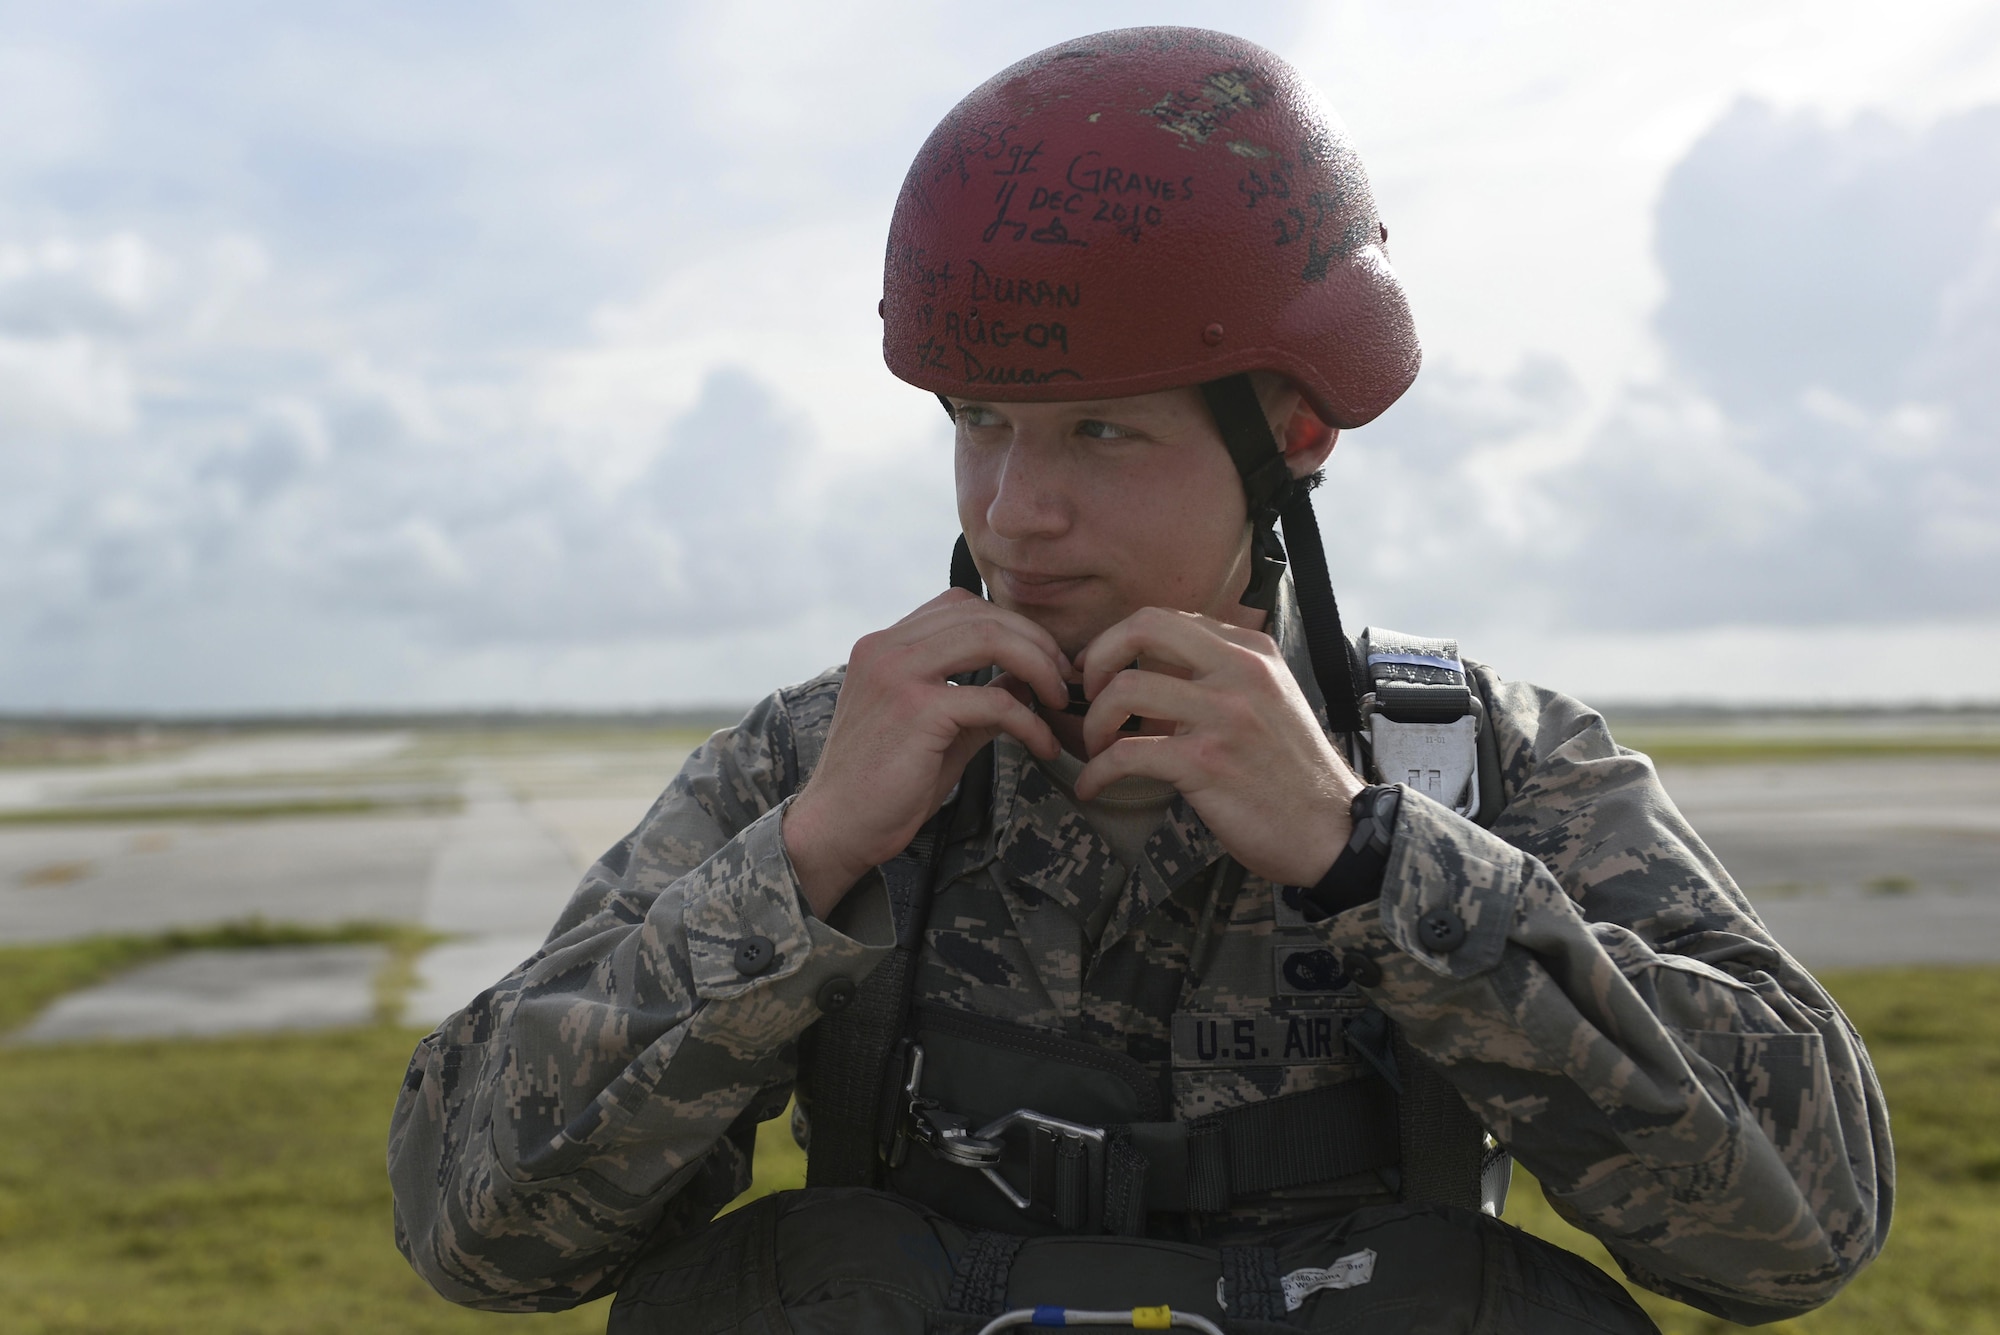 Capt. Justin Bateman, 736th Security Forces Squadron director of operations, dons a red helmet prior to a static line parachute operation July 3, 2015, at Andersen Air Force Base, Guam. The red helmet identifies members who are performing their first jump after U.S. Army Basic Airborne School. Per tradition, Bateman signed the helmet after completing his jump. (U.S. Air Force photo by Senior Airman Katrina M. Brisbin/Released)